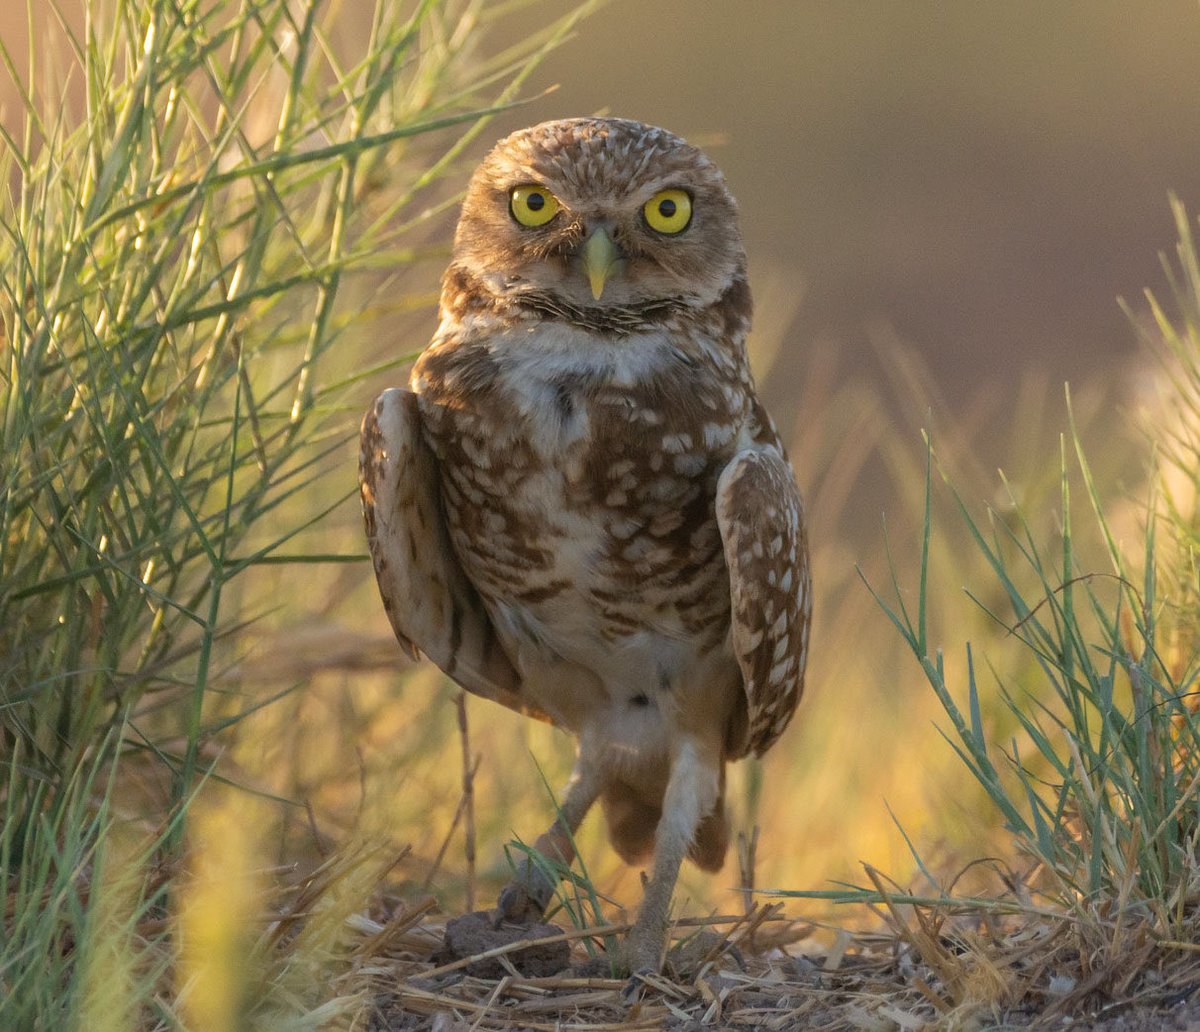 "I skipped leg day for this" burrowing owl: Wendy Miller